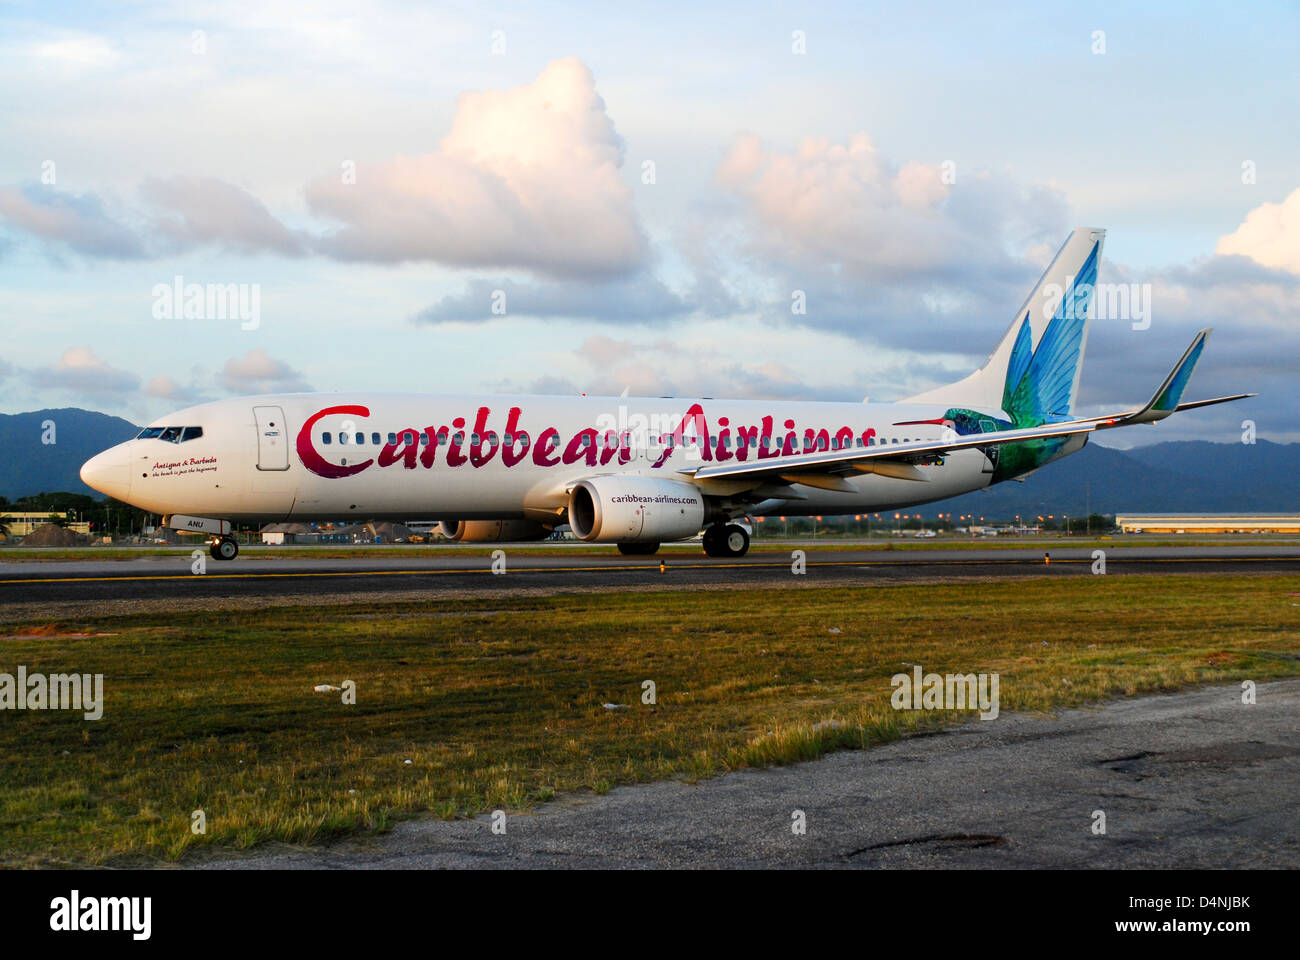 A Caribbean Airlines aircraft on the runway at Piarco Airport,Trinidad Stock Photo